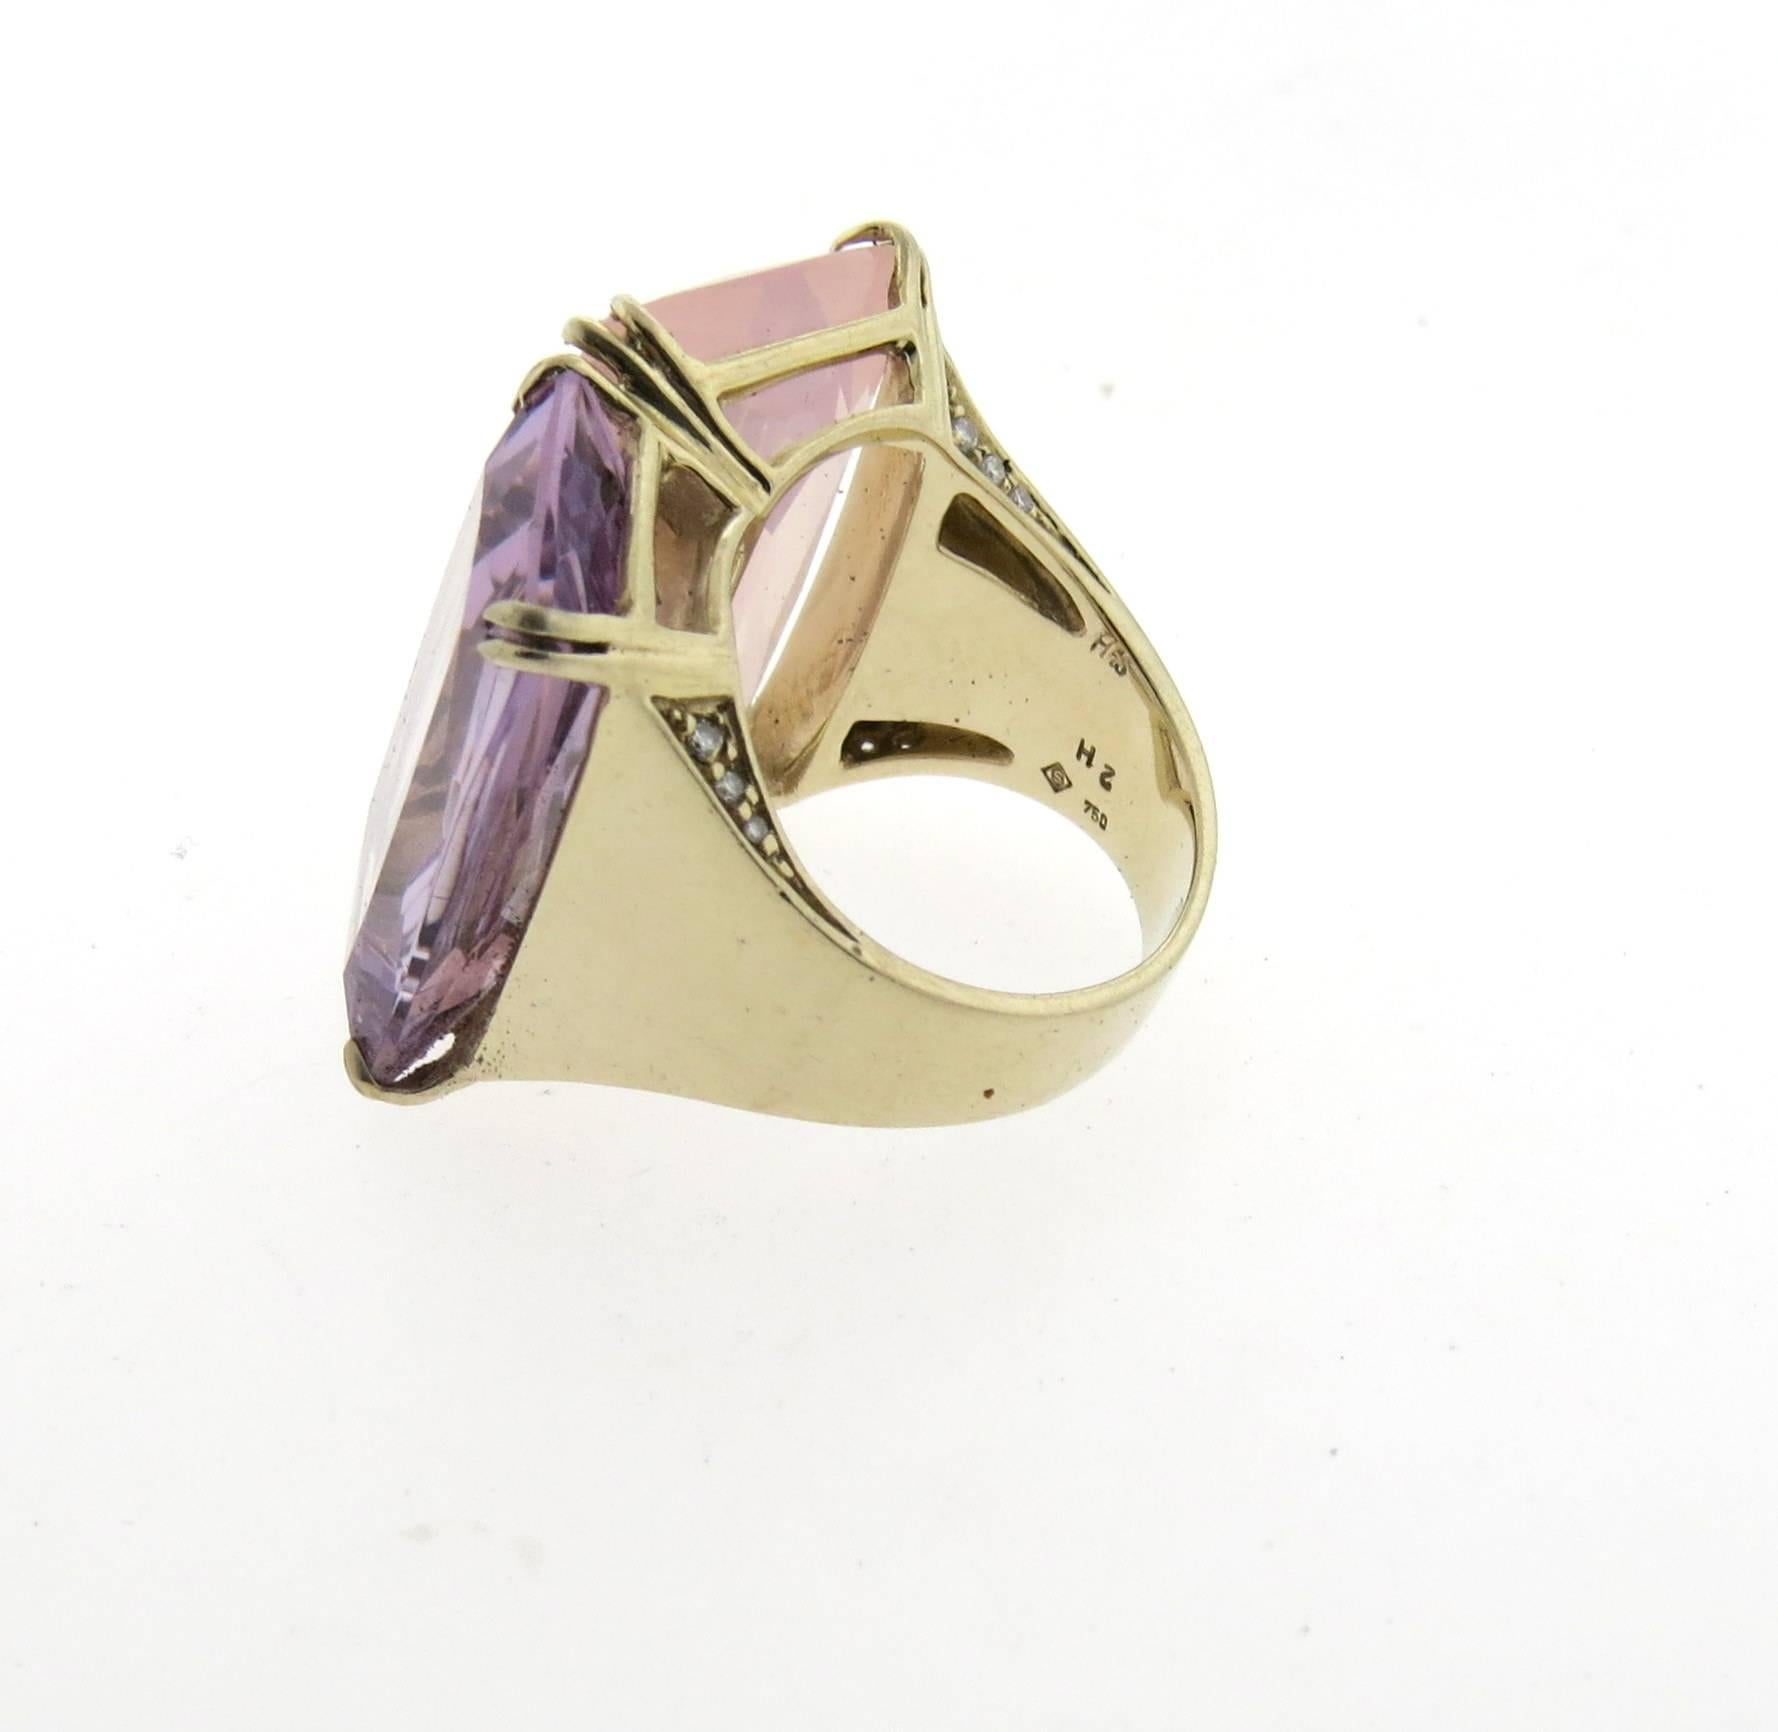 Impressive large 18k gold ring, crafted by H.Stern for iconic Cobblestone collection, featuring diamonds on sides, amethyst and rose quartz. Ring size 7 1/2, ring top is 25.5mm x 25mm and weighs 24.8 grams. Marked:2 H, 750, S mark, signature Star 